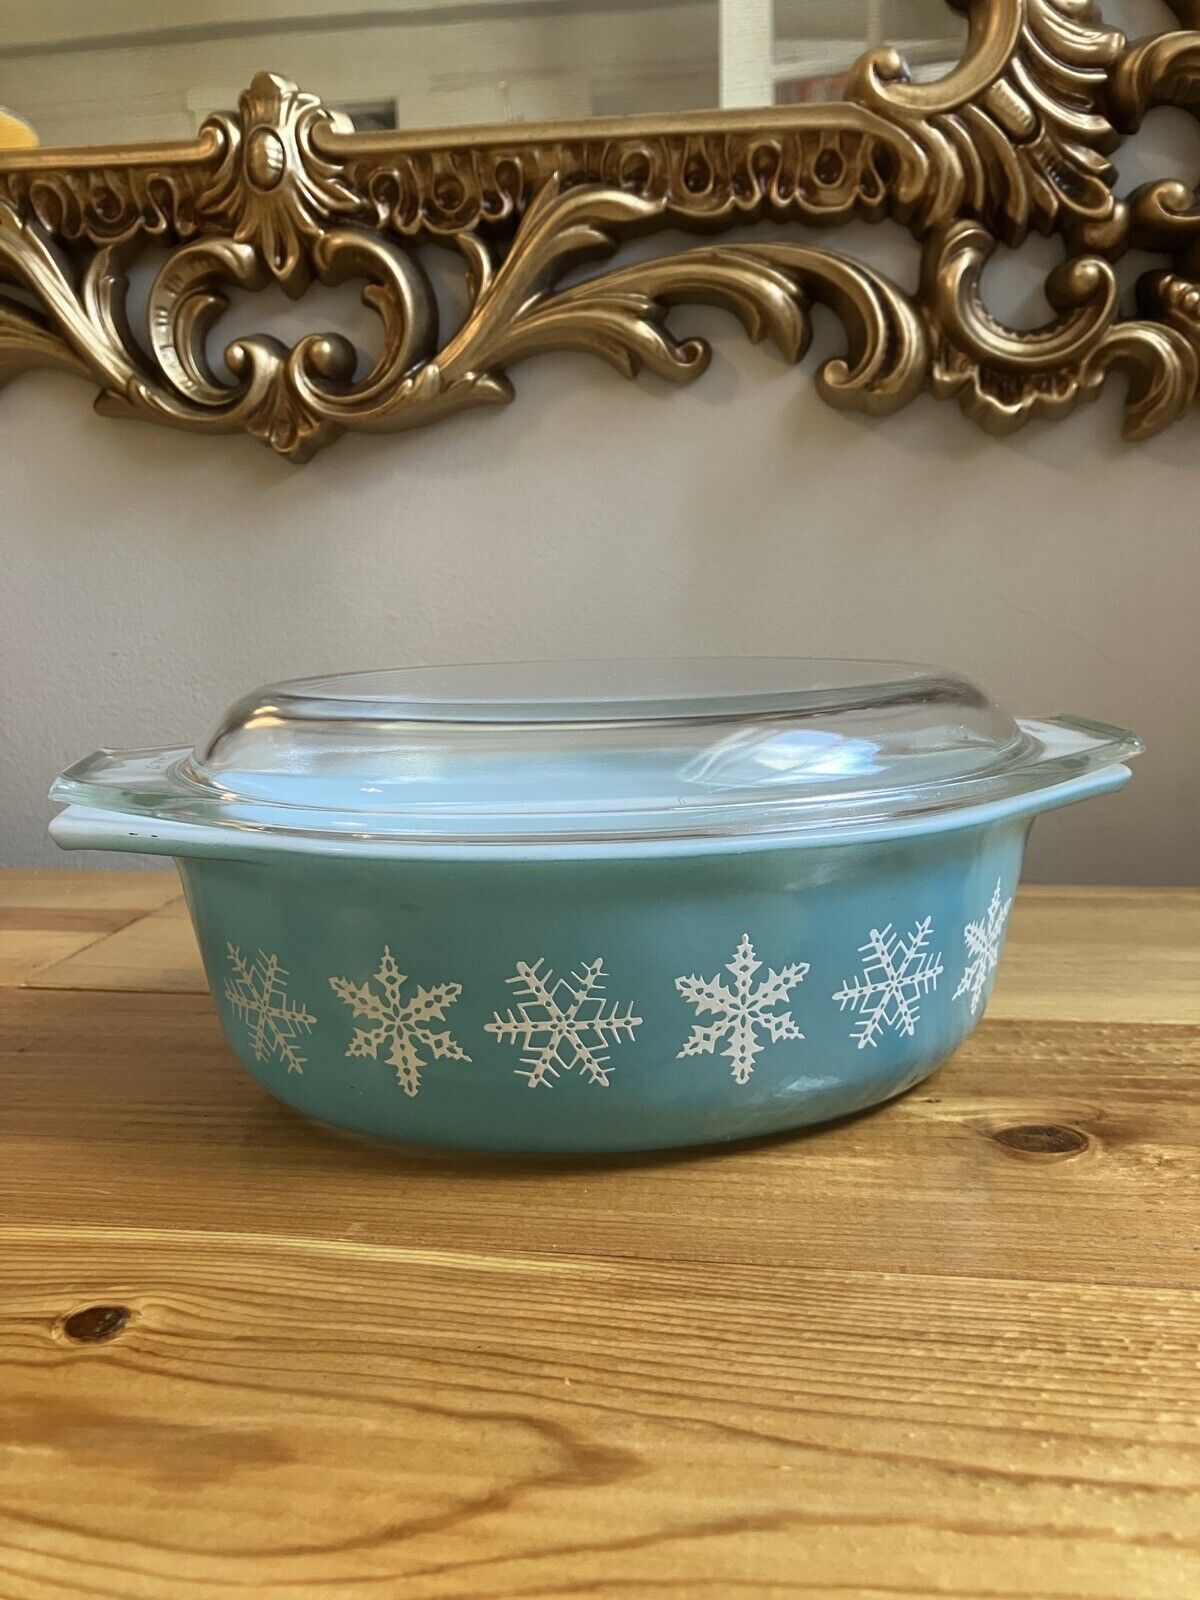 Pyrex Vintage 043 Turquoise Snowflake Oval Casserole Dish with Lid 2 1/2 qt